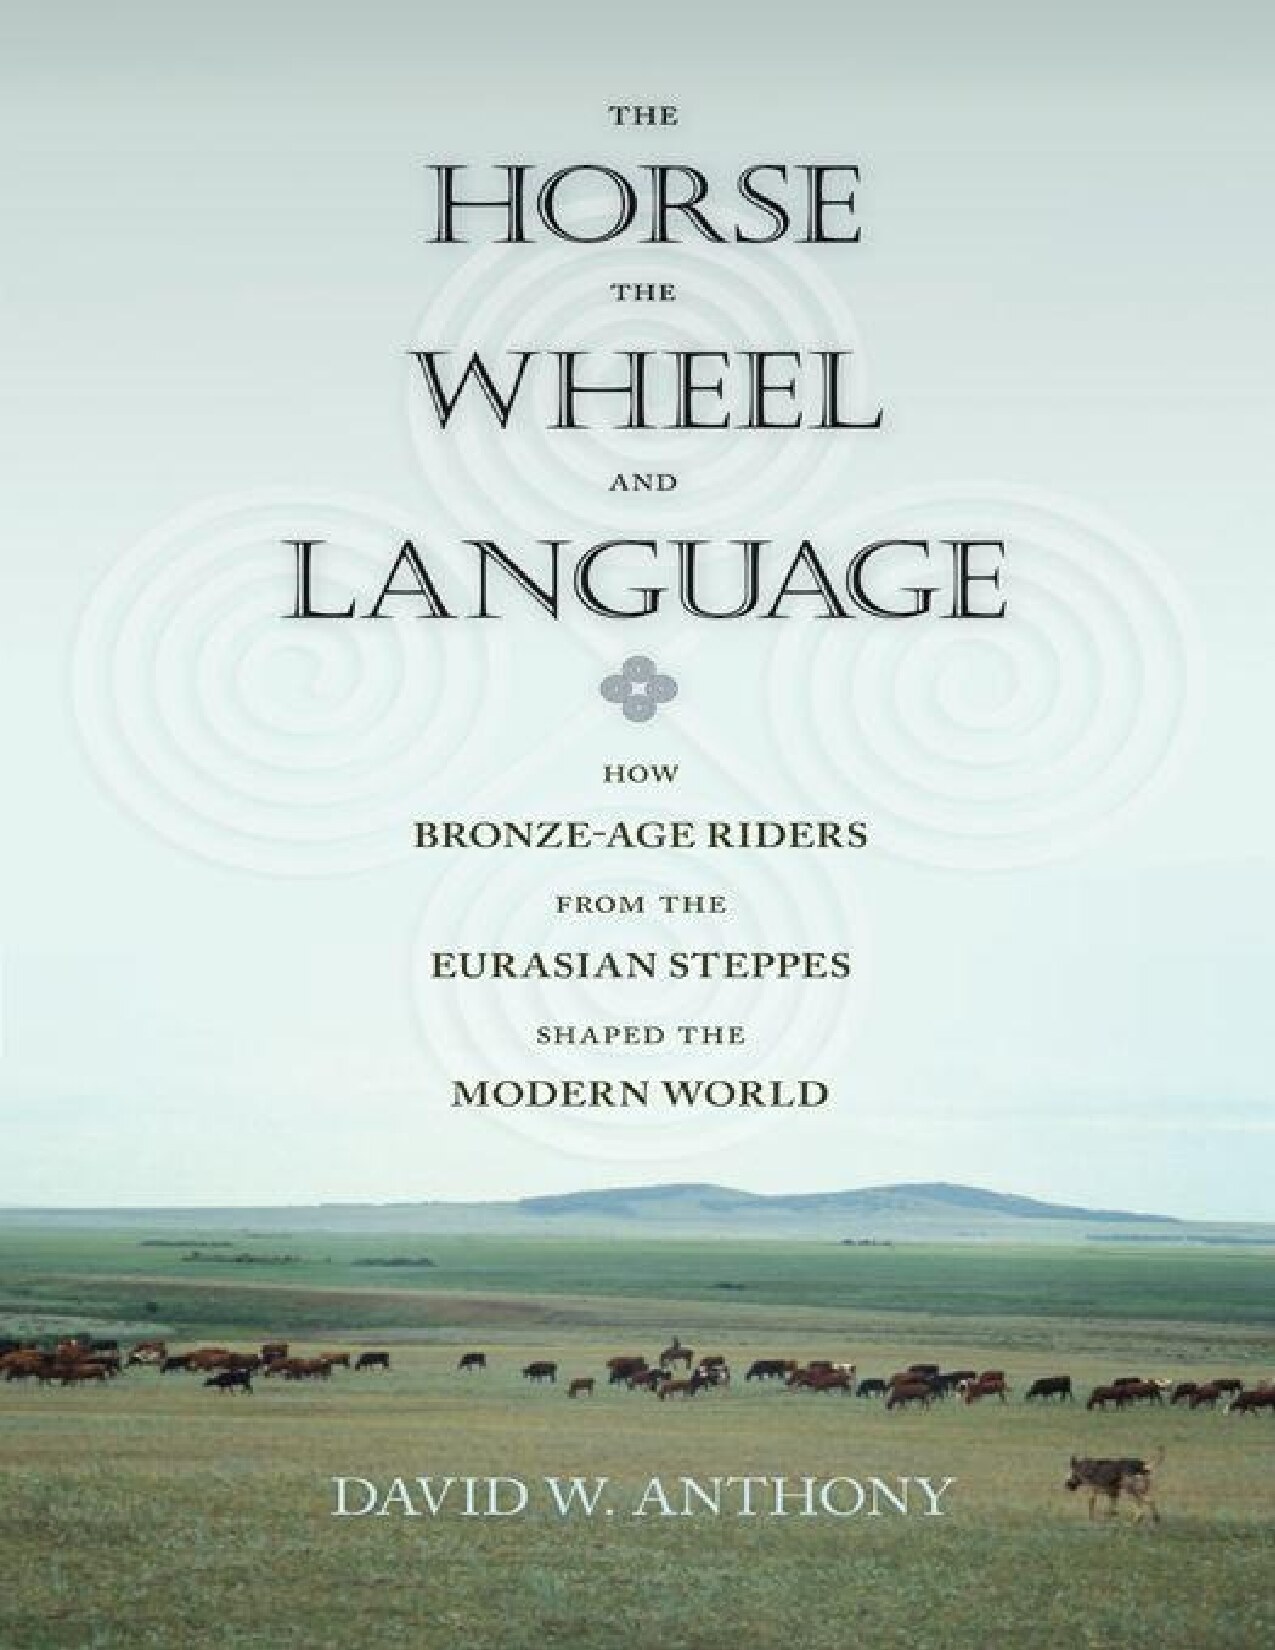 The Horse, the Wheel, and Language: How Bronze-Age Riders From the Eurasian Steppes Shaped the Modern World